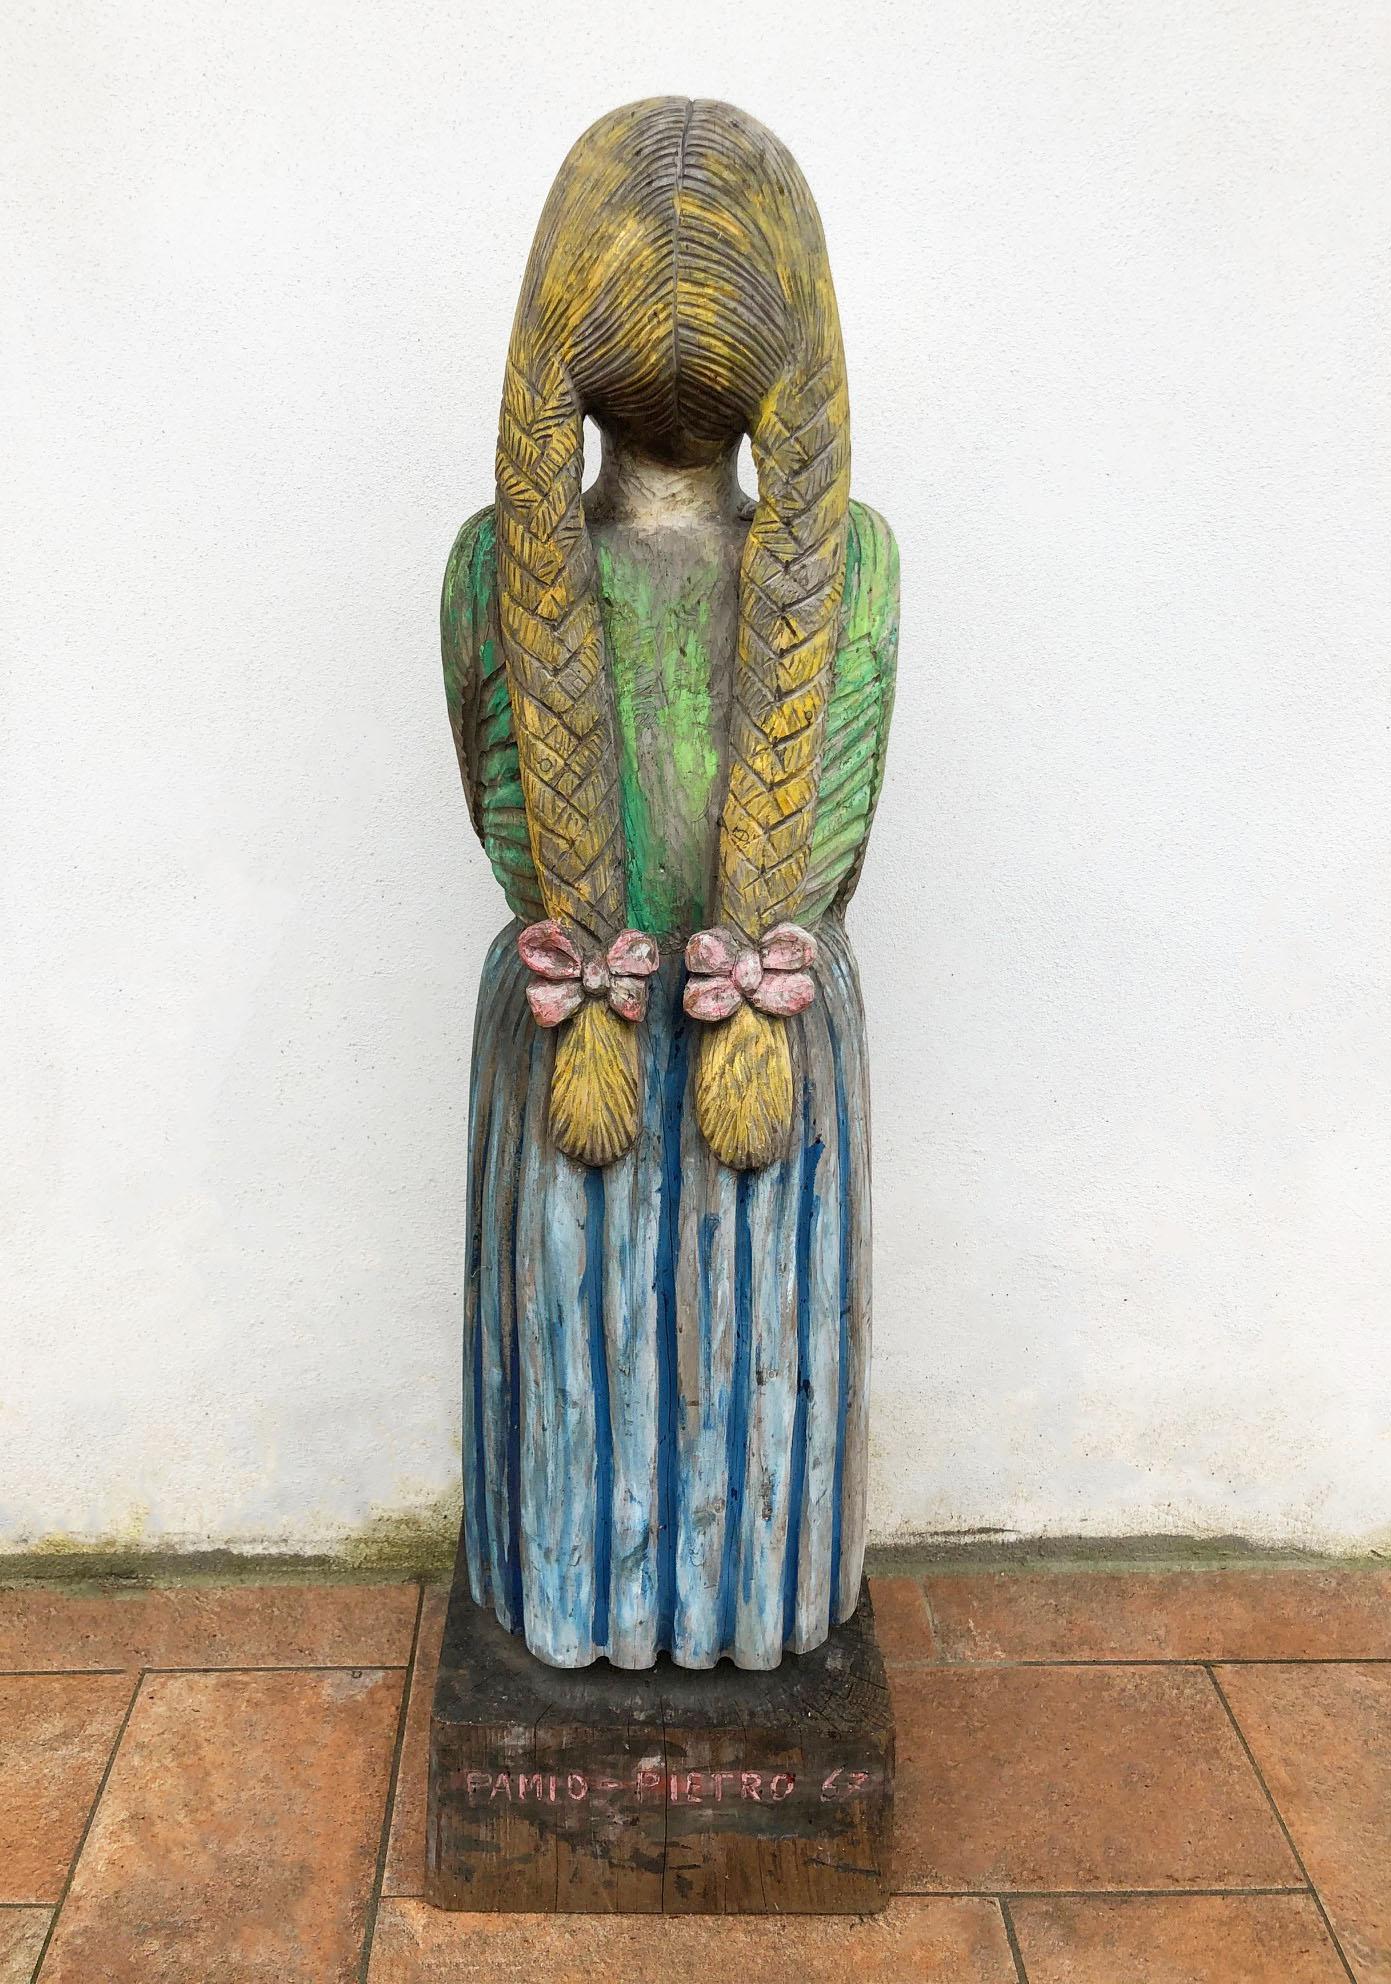 Folk Art Hand Carved Wooden Statue from 1967, Original Painting, Unique Piece Italian